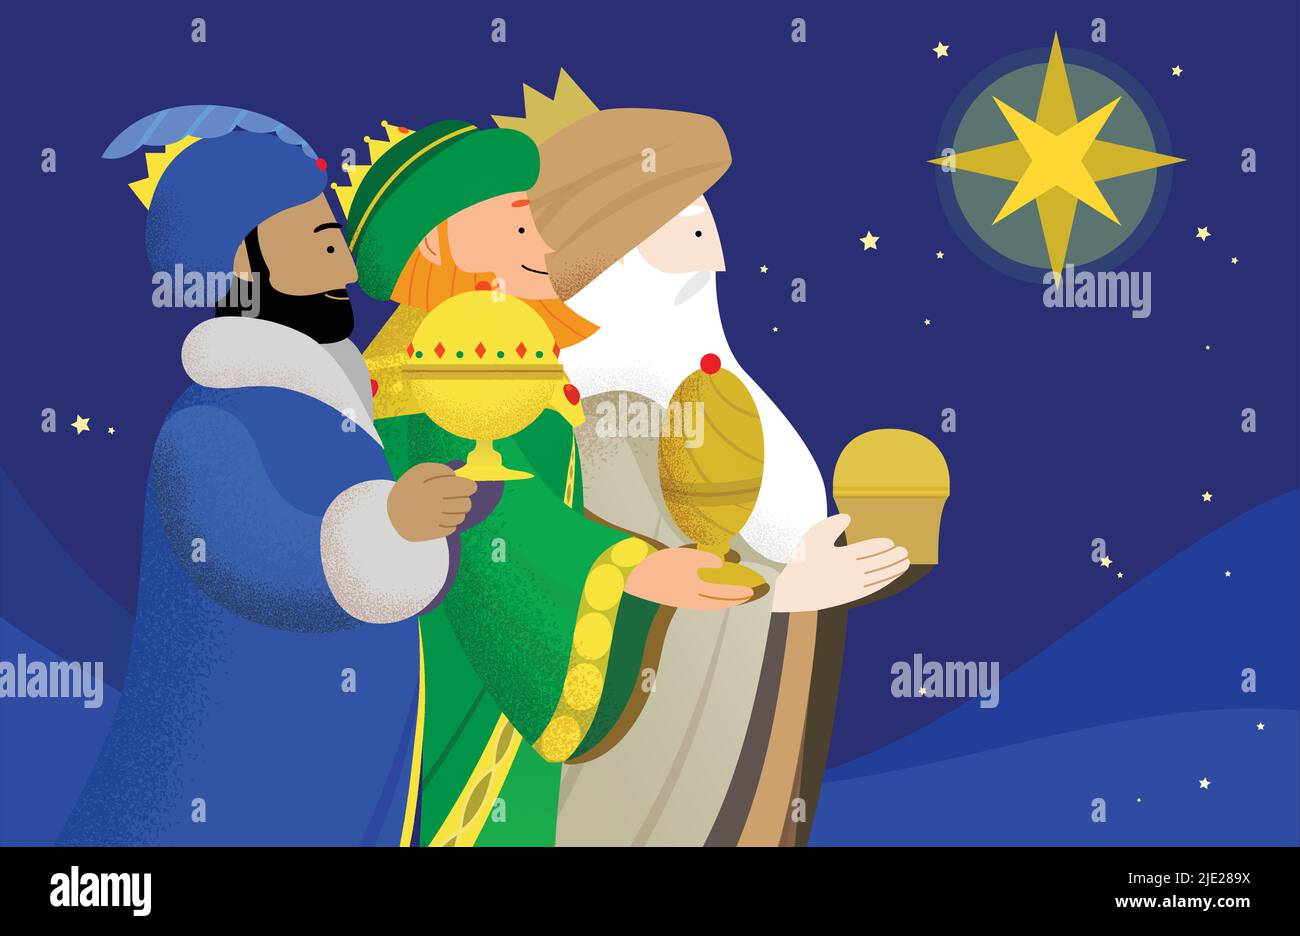 Celebration of Epiphany vector illusration. The Three Wise Men or the Three Kings or the Three Magi following the star of Bethlehem bearing gifts. Stock Vector